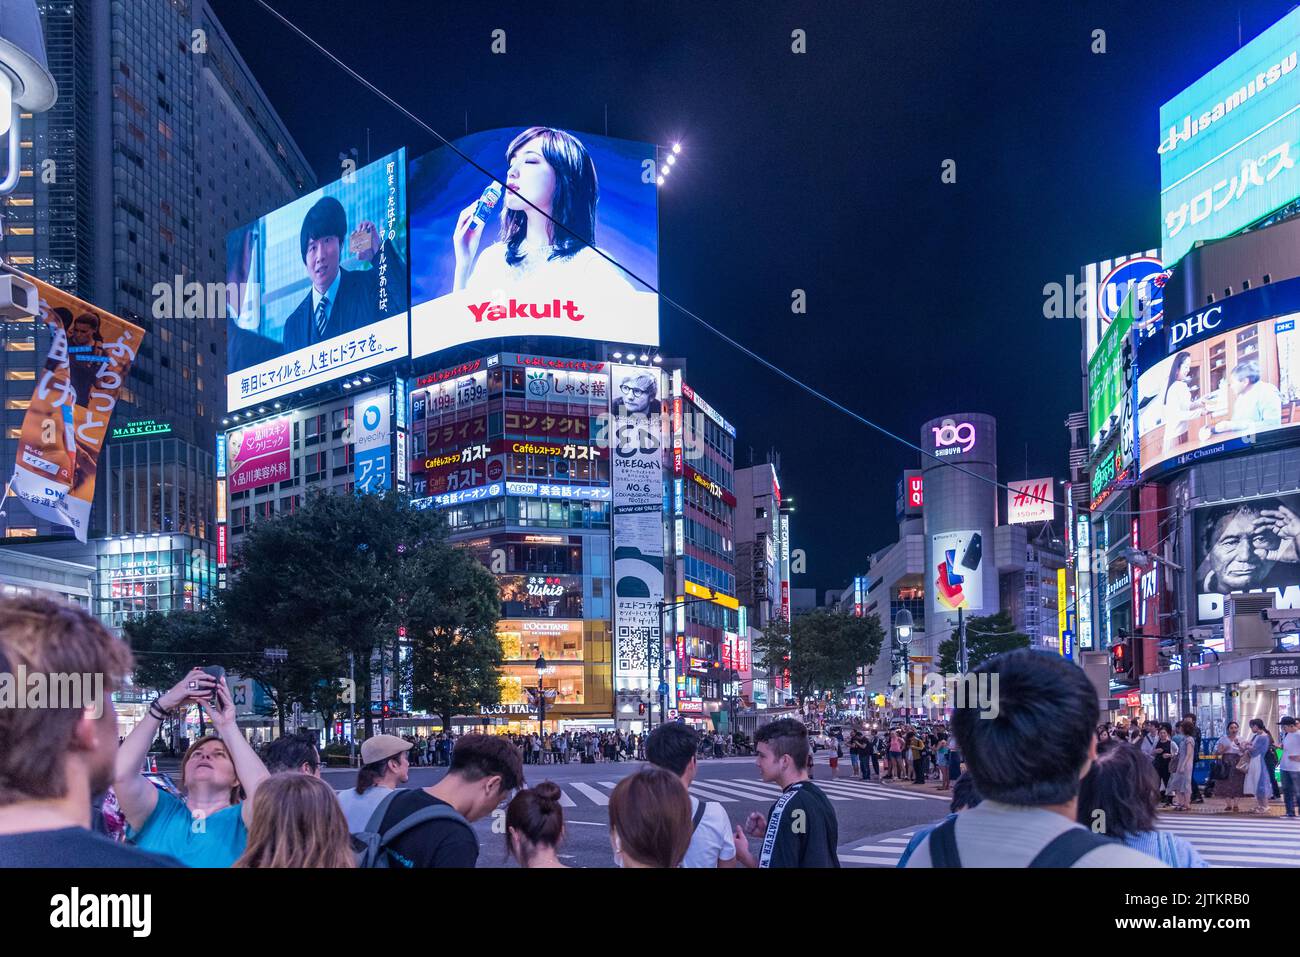 Tokyo, Shibuya, Japan - July 27, 2019: Shibuya intersection in Tokyo at night one of the busiest pedestrian crossings. Stock Photo